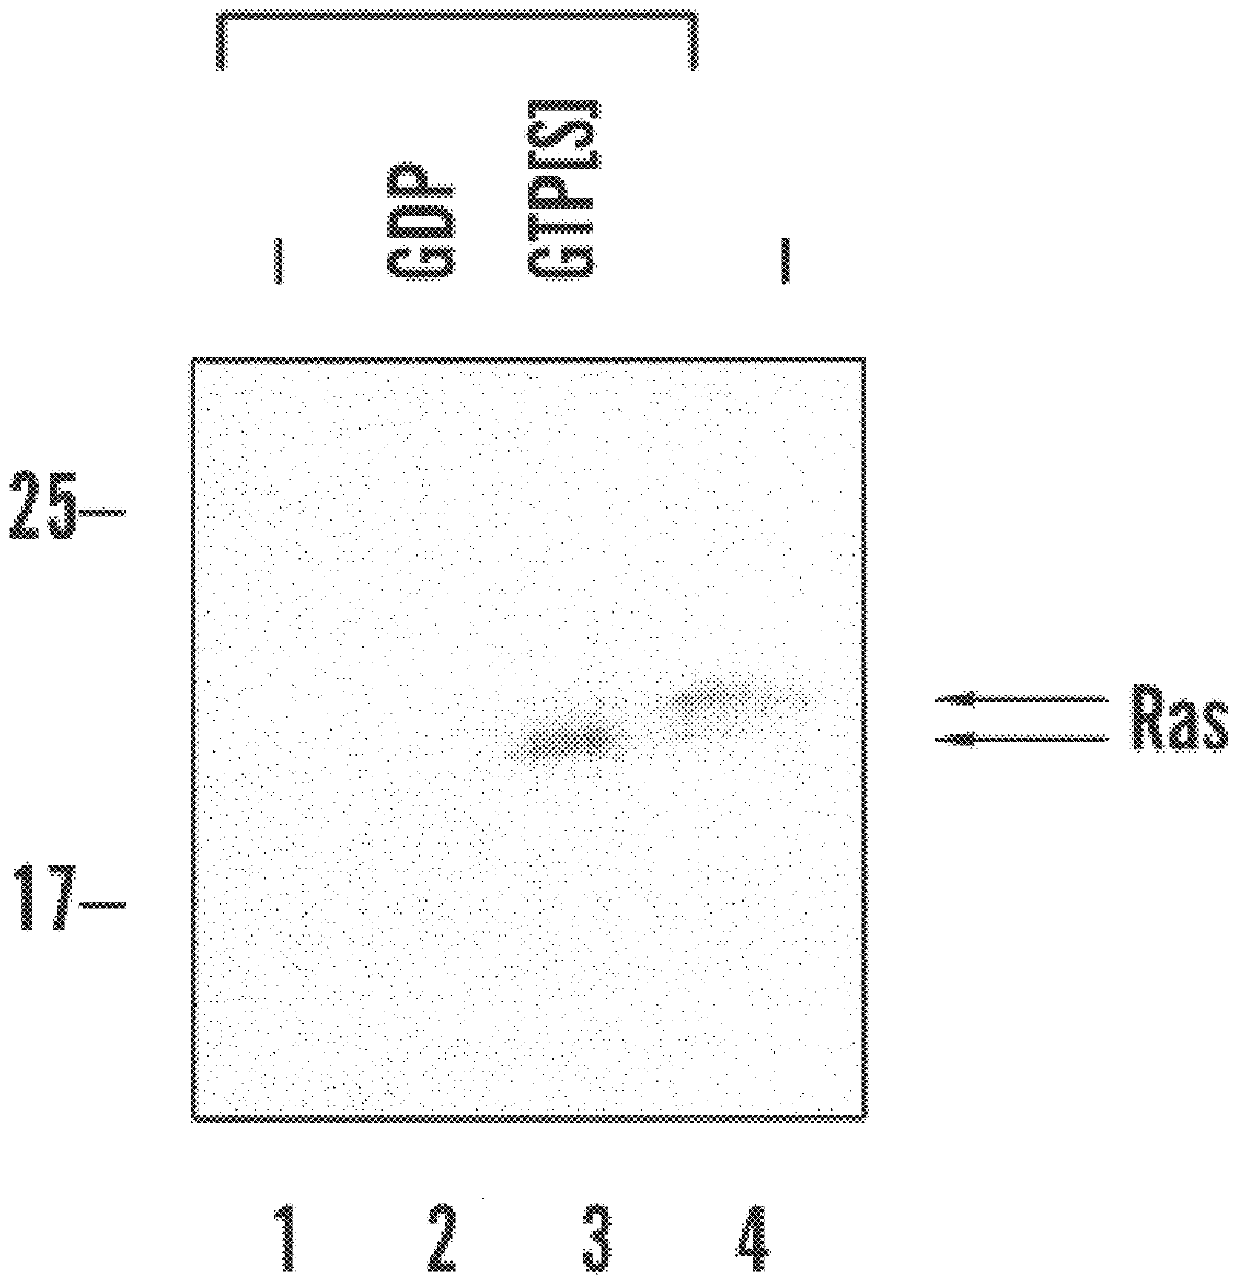 Activated ras interaction assay